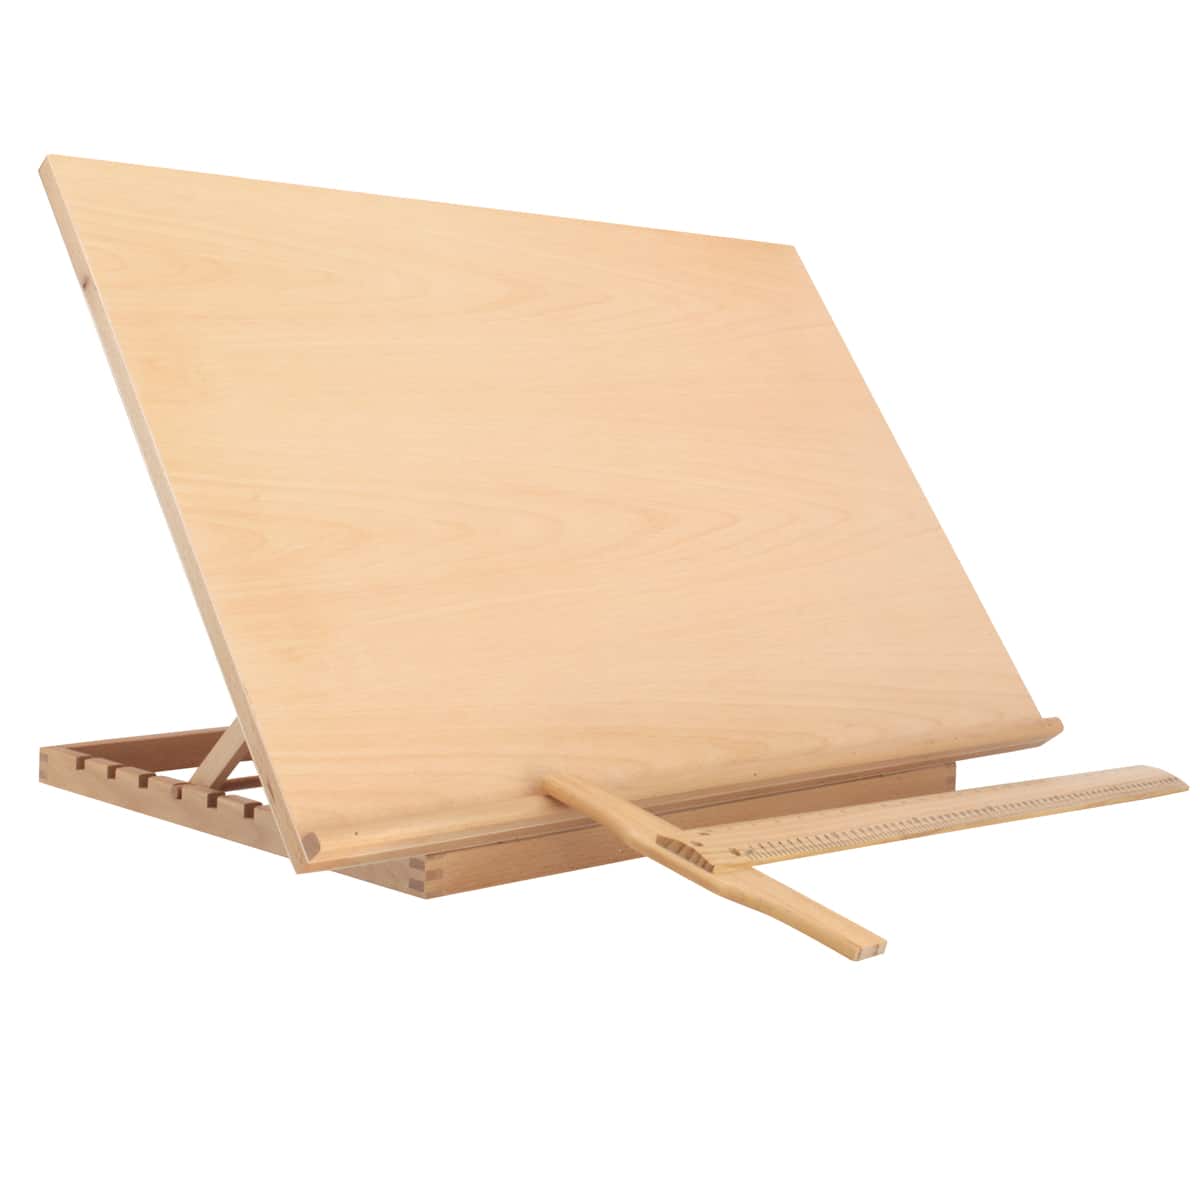 Easel Foldable Table Top With Support For Canvas Painting Crafts